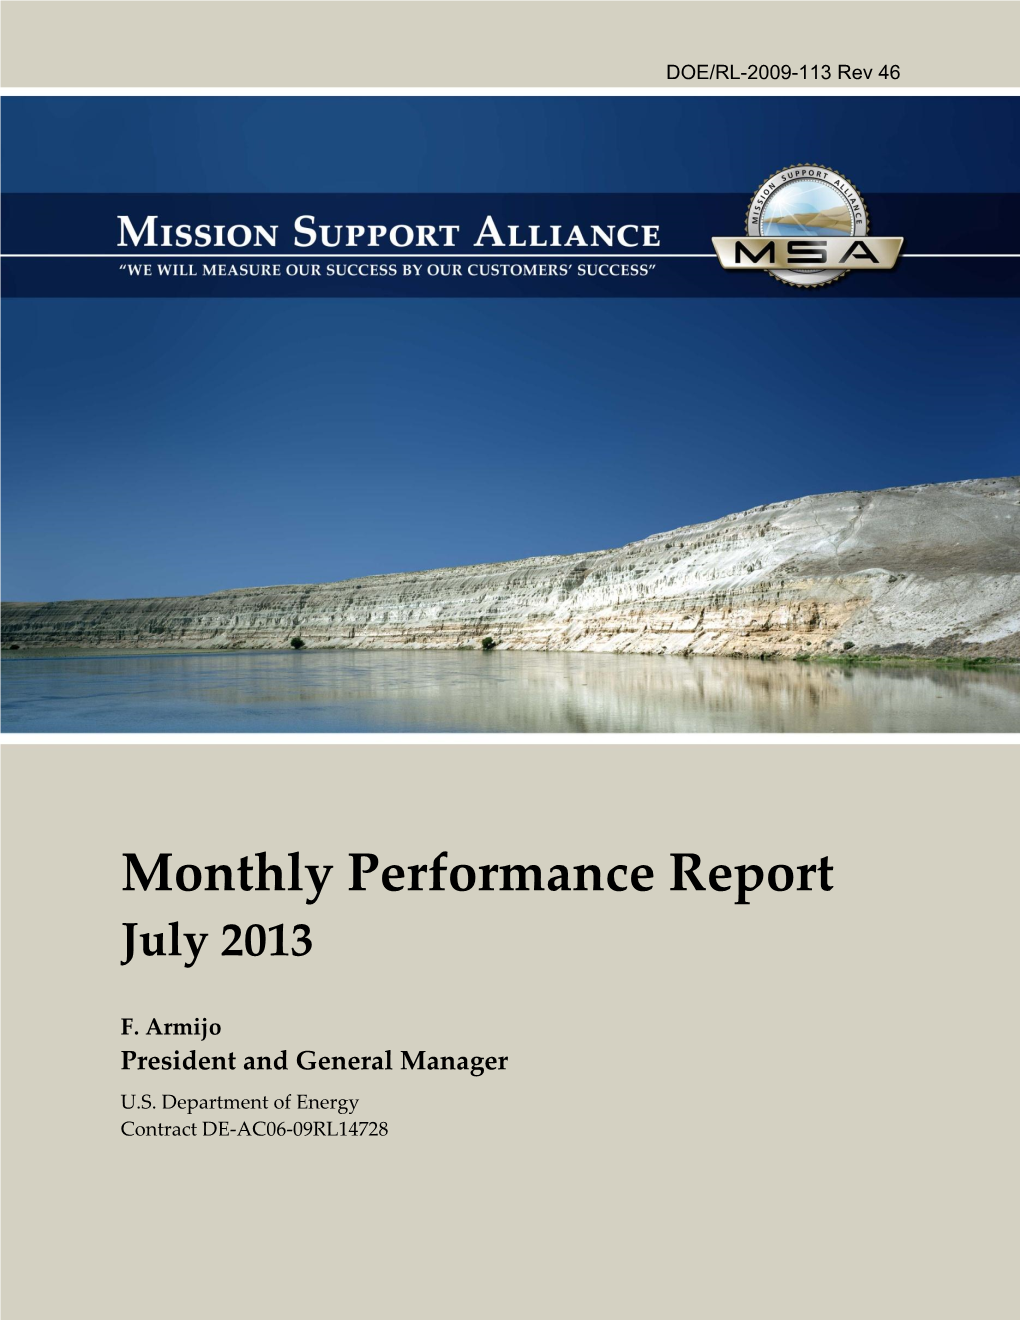 Monthly Performance Report July 2013